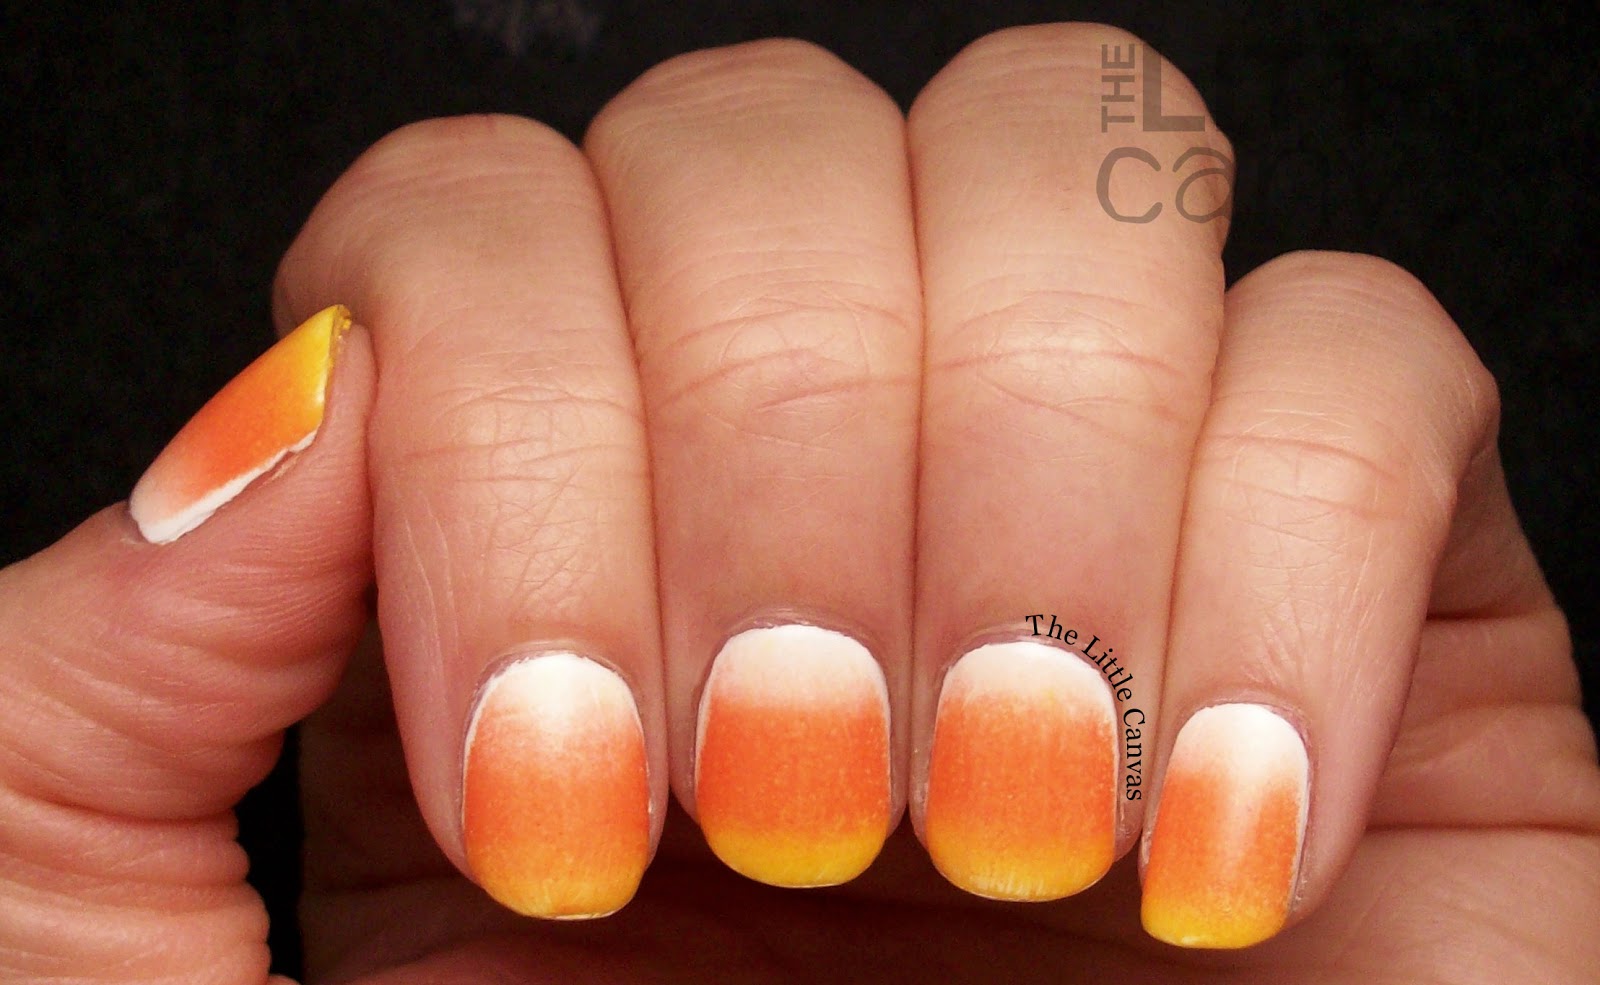 6. "Candy Corn Nail Art Step by Step" - wide 6